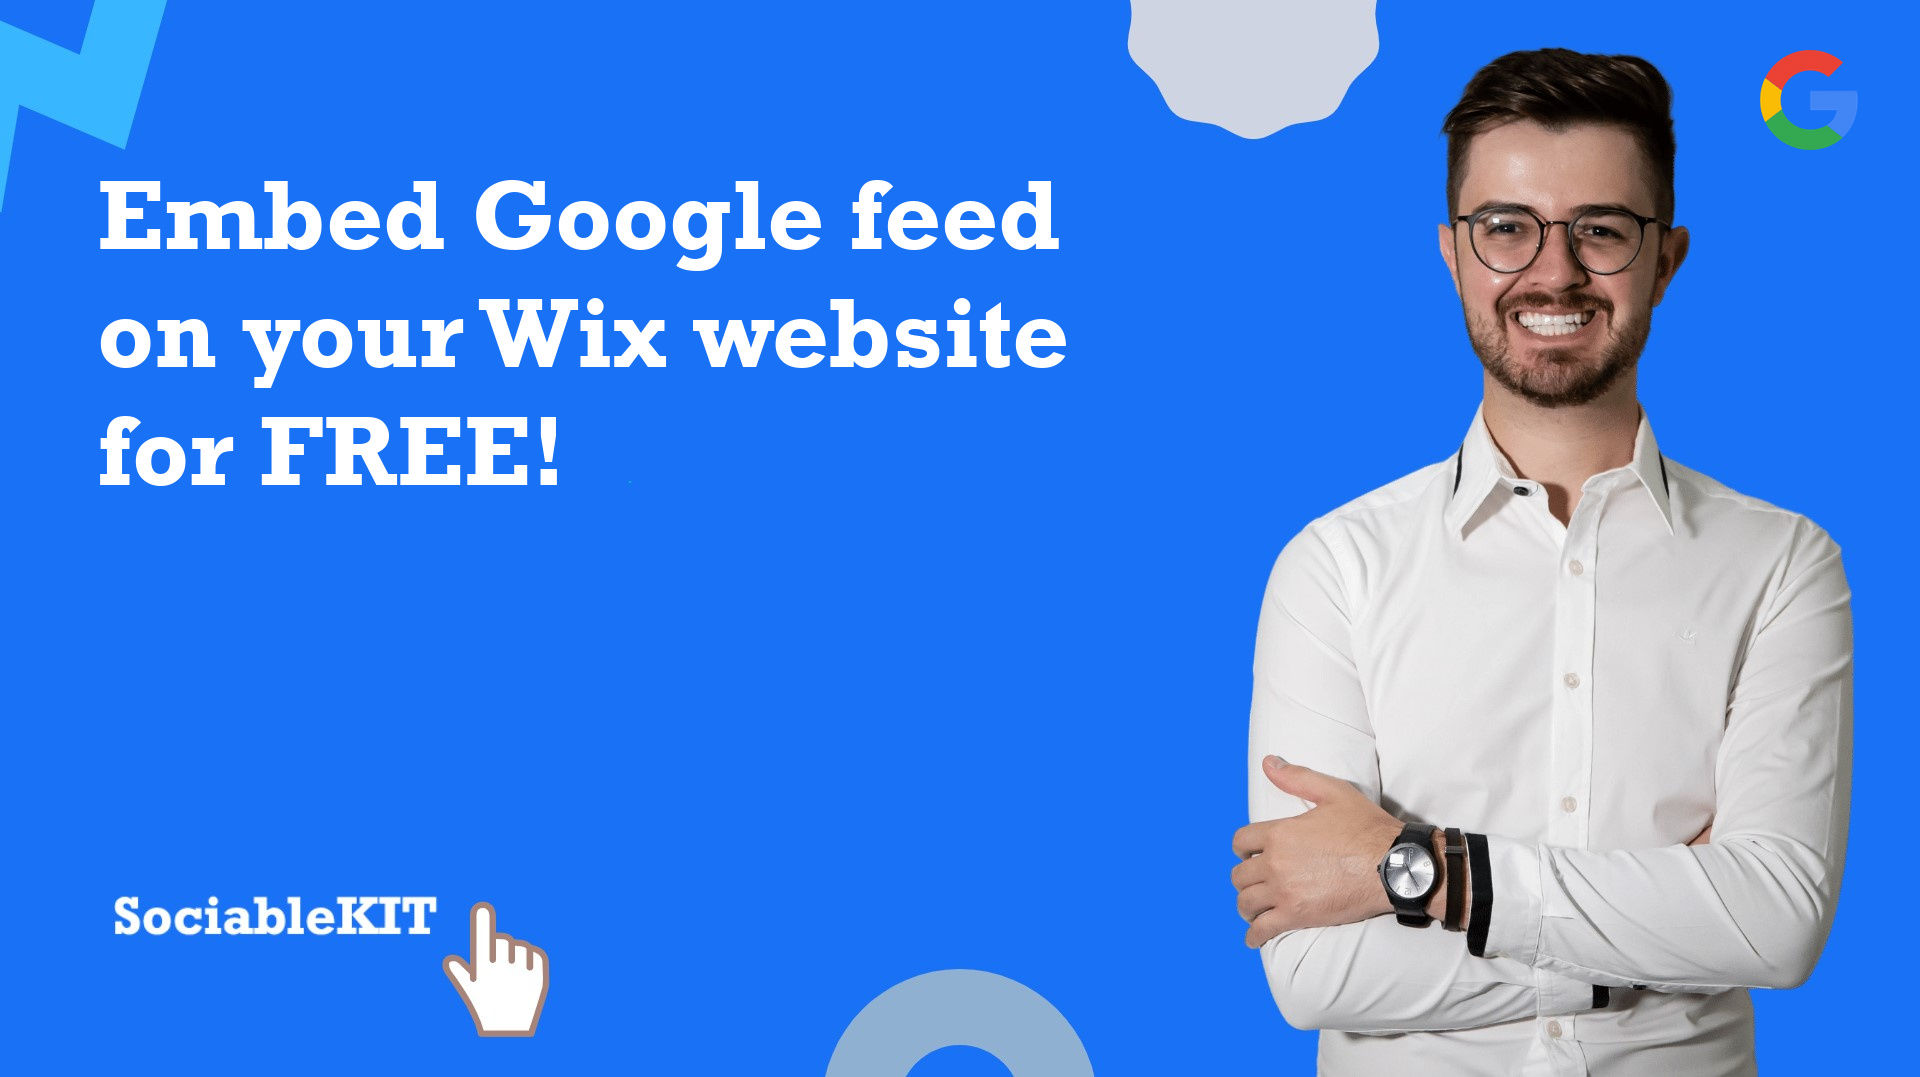 How to embed Google feed on your Wix website for FREE?